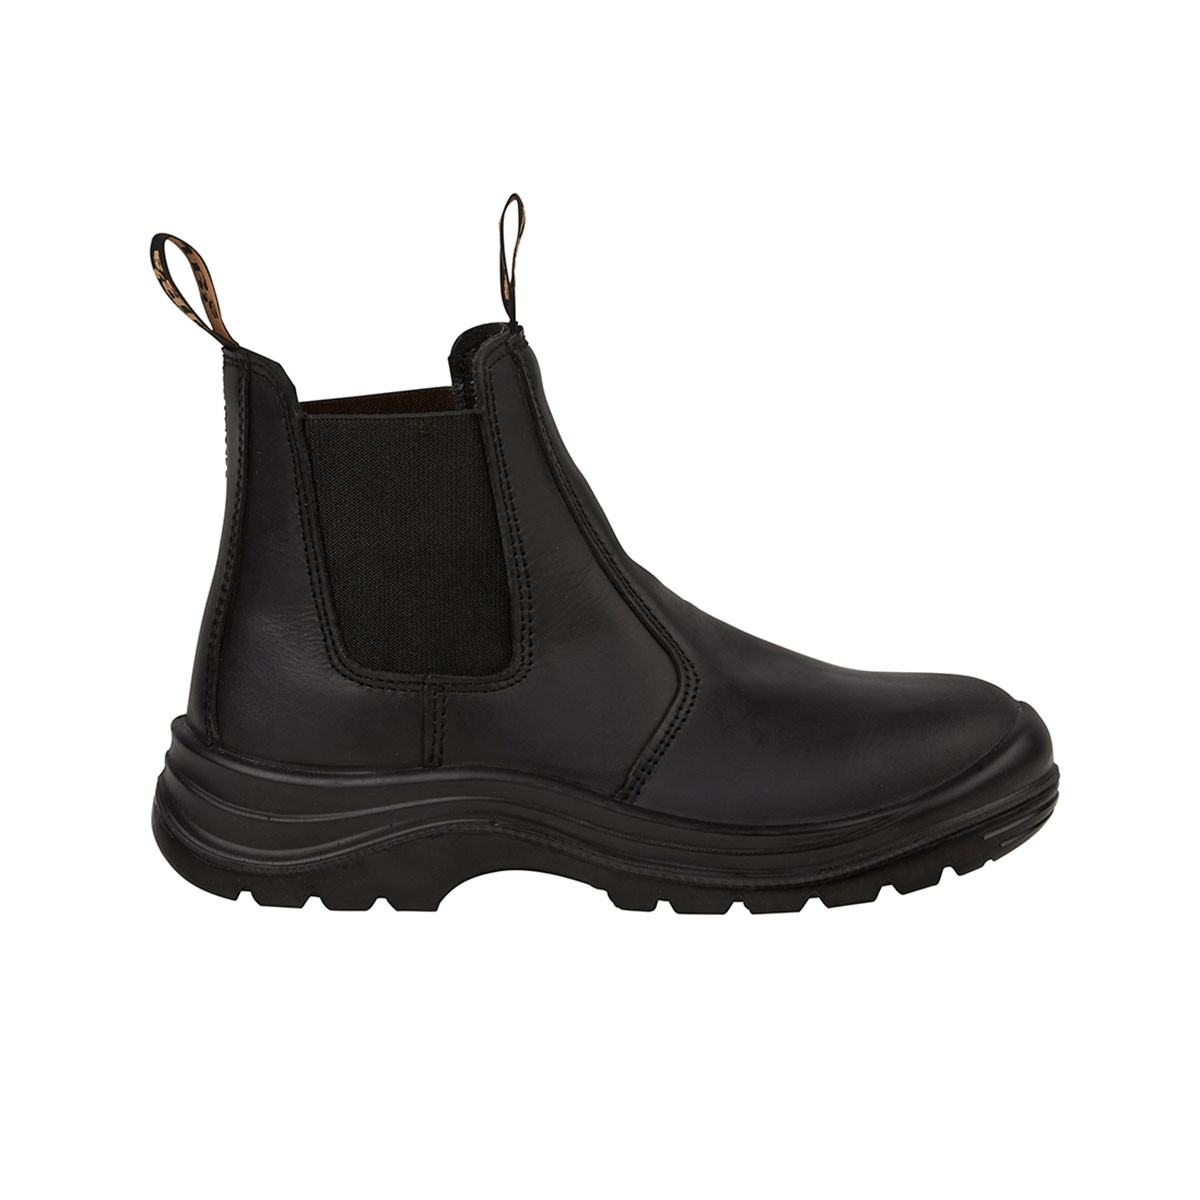 JB'S ELASTIC SIDED SAFETY BOOT - DANZO